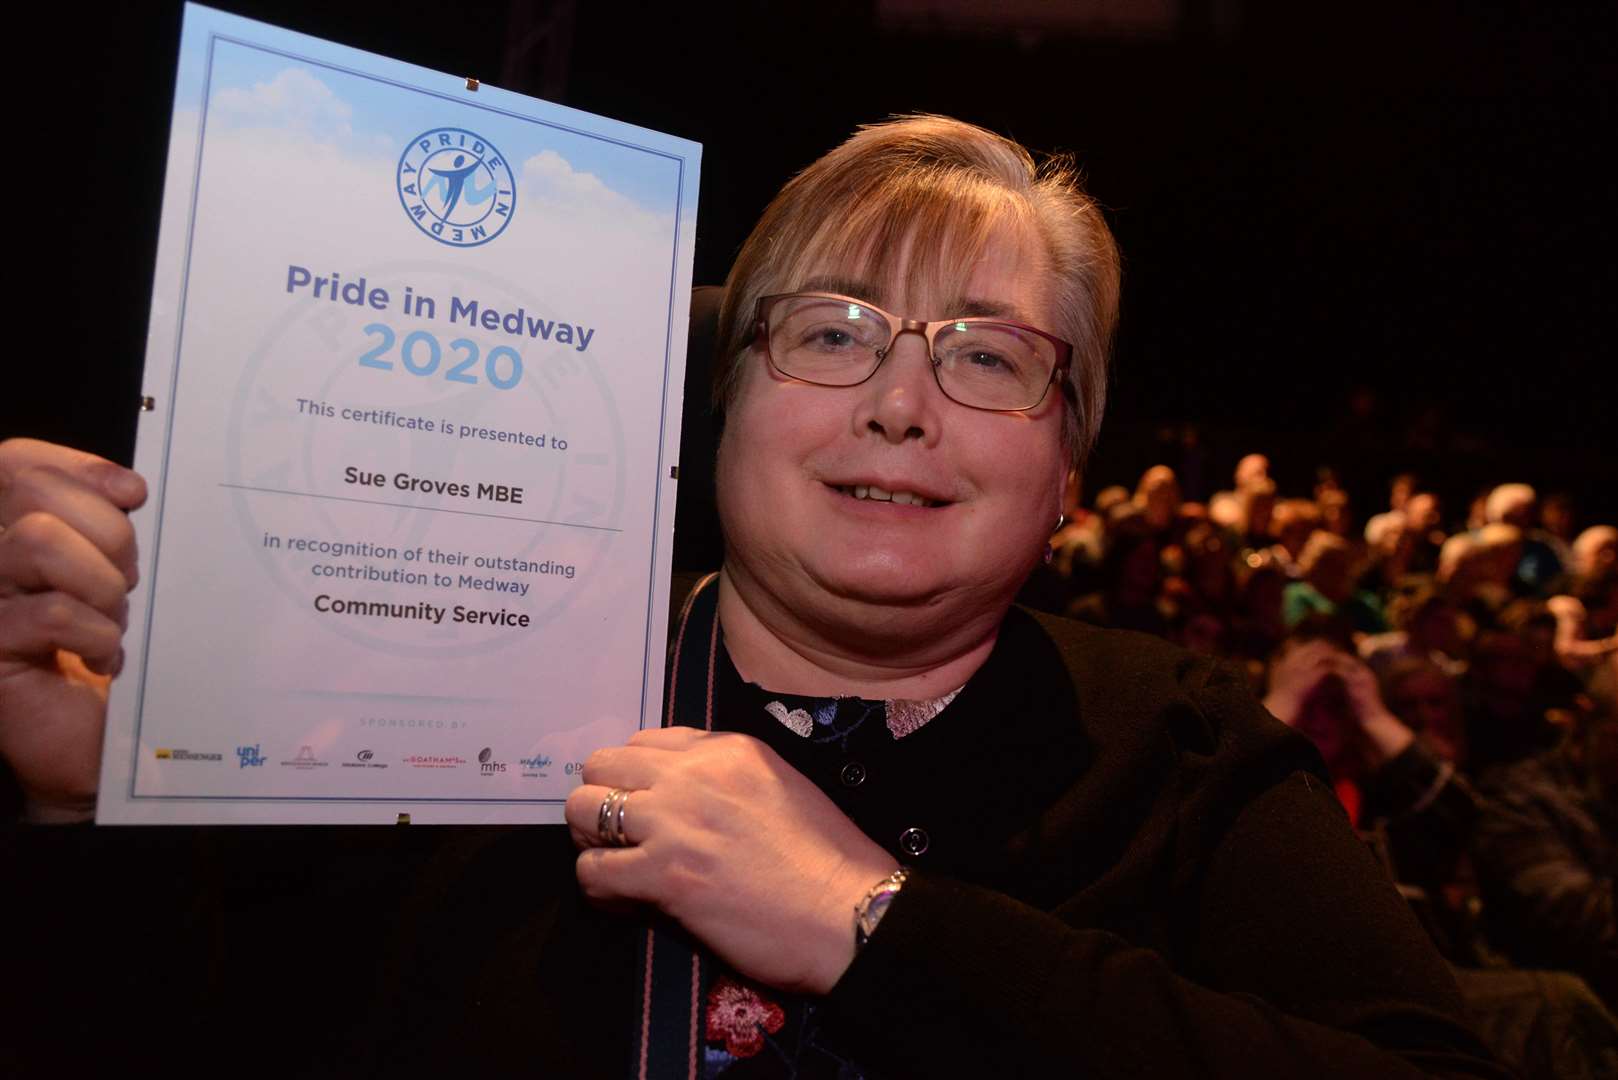 Sue Groves MBE with her community service certificate